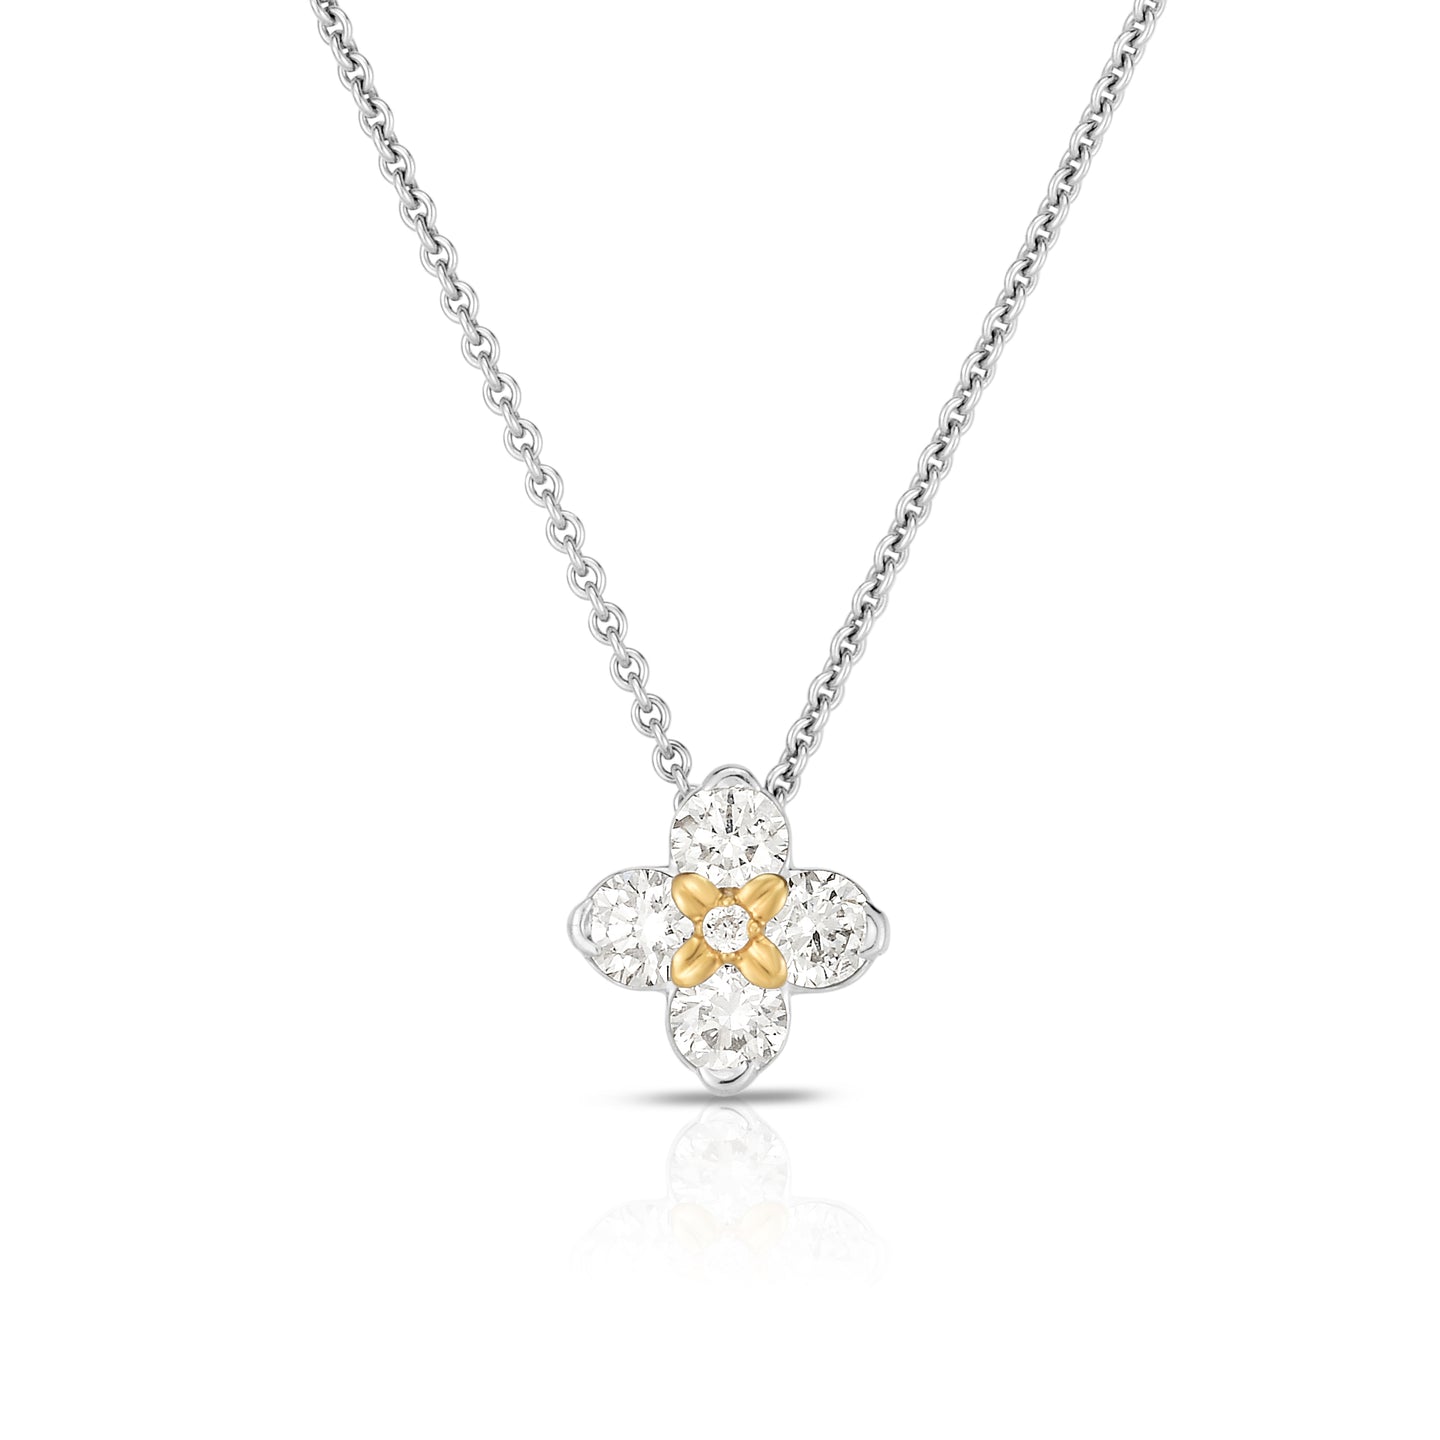 Sabel Collection 14K White and Yellow Gold Diamond Petite Flower Pendant Necklace